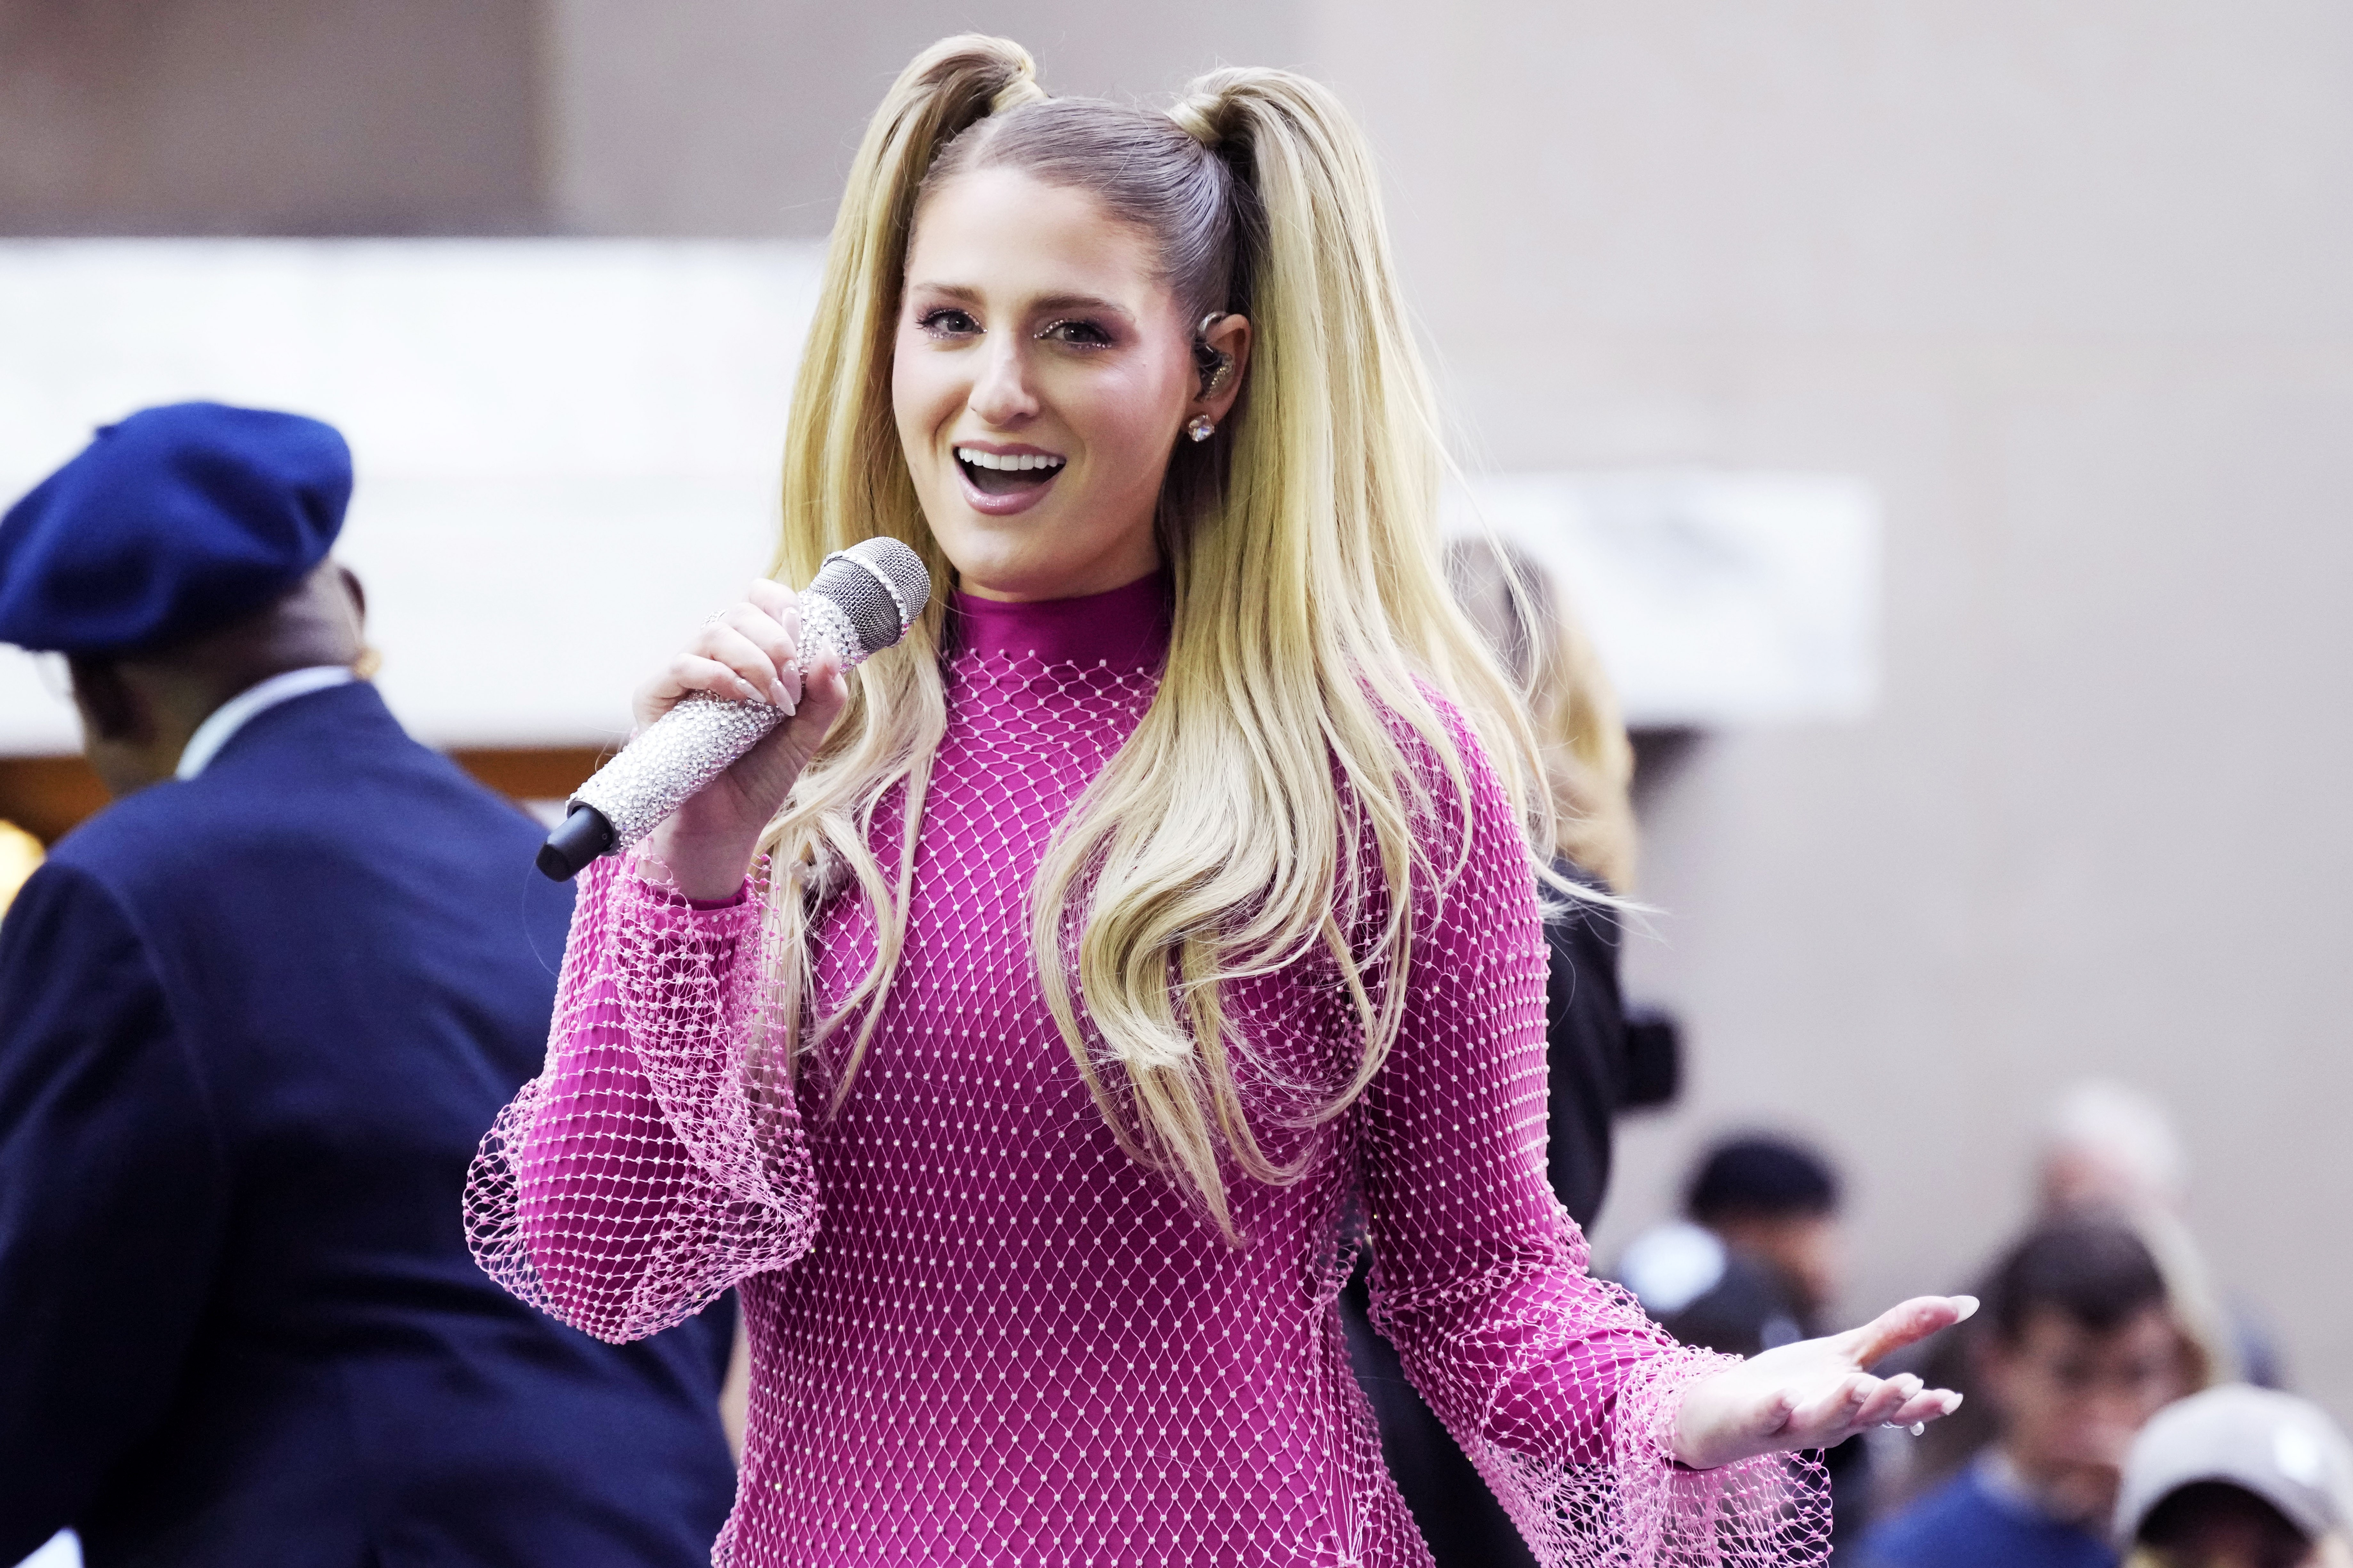 Meghan Trainor shares video 'Made You Look' from her new album